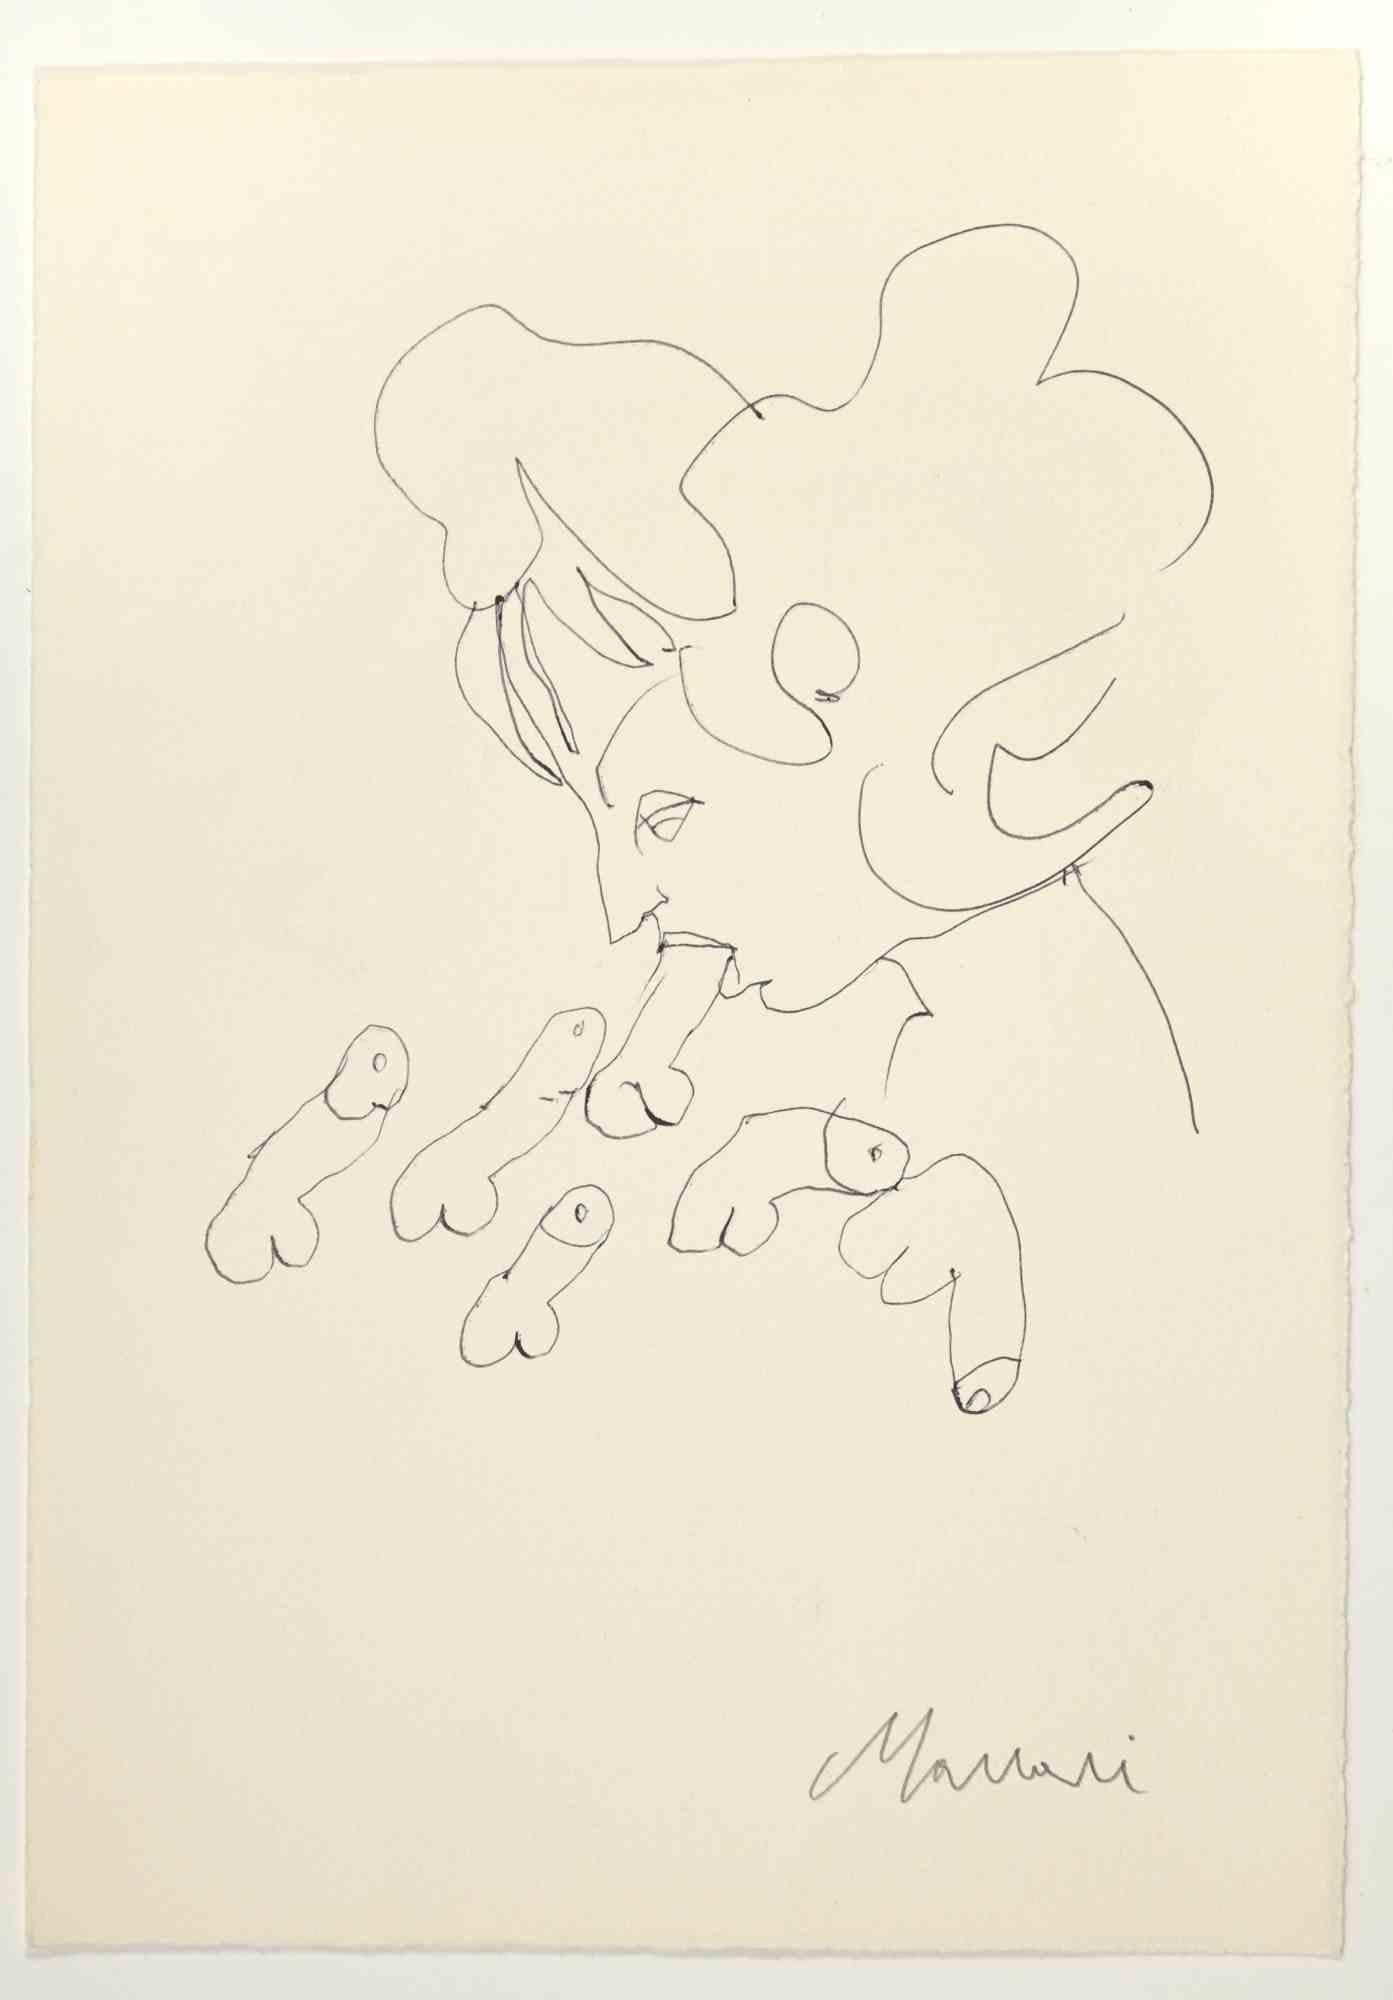 Erotic Scene is a pen Drawing realized by Mino Maccari  (1924-1989) in the 1960s.

Hand-signed on the lower, with another drawing on the rear.

Good condition.

Mino Maccari (Siena, 1924-Rome, June 16, 1989) was an Italian writer, painter, engraver